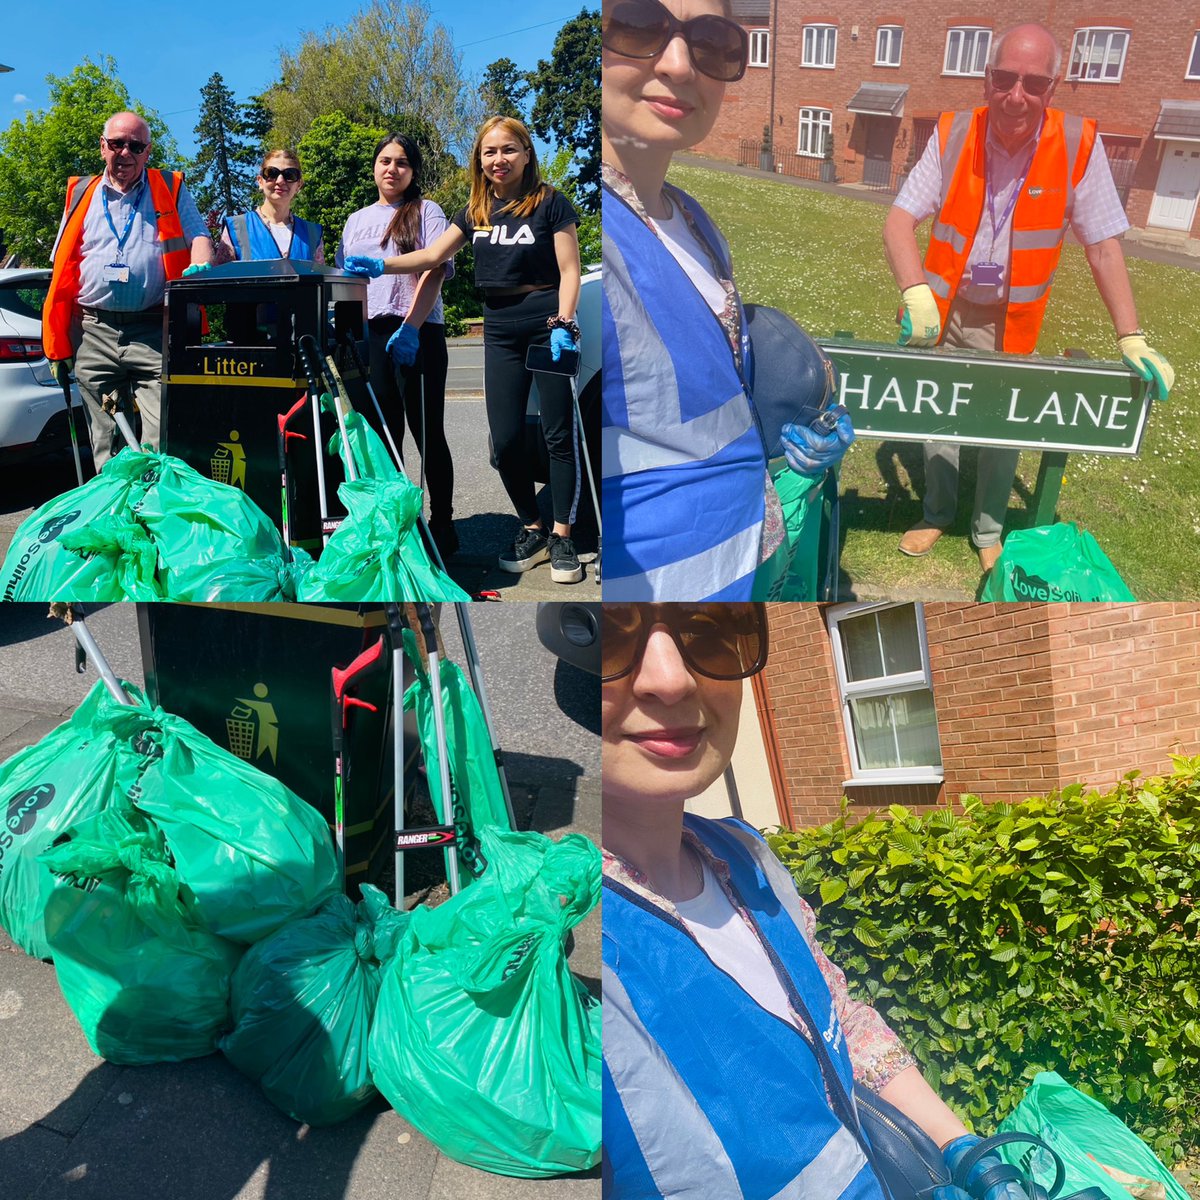 A sunny  Sunday morning in #Solihull litter picking around Silhill with Cllr Peter Hogarth MBE, and lovely residents of Silhill. Thank you @LoveSolihull for providing the litter picks and the bags. @CWOwestmidlands @solboroughcons #loveyourcommunity #litterpick